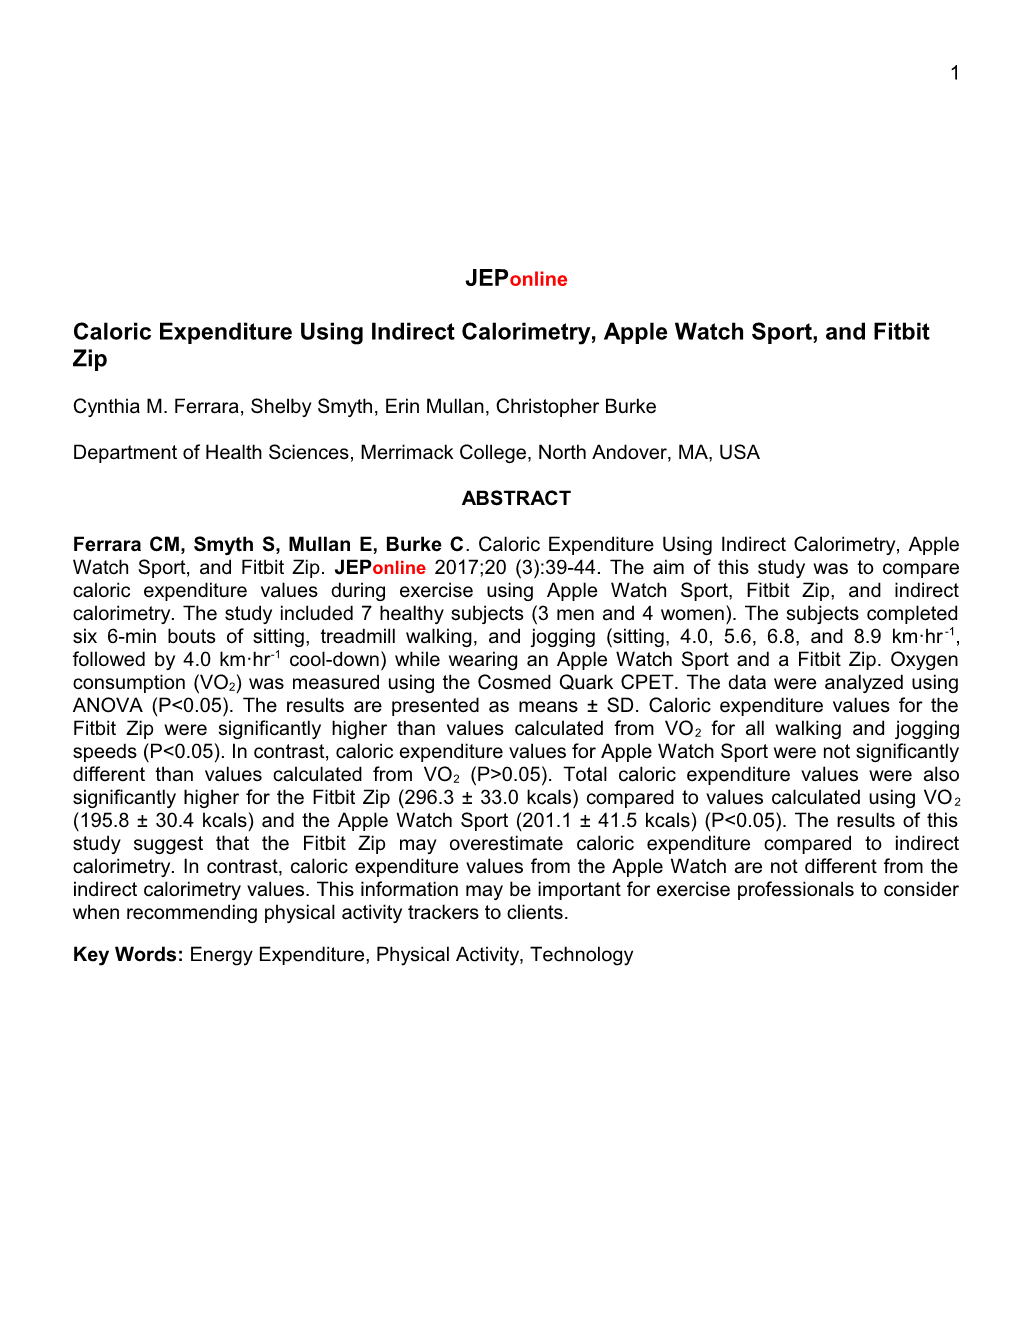 Caloric Expenditure Using Indirect Calorimetry, Apple Watch Sport, and Fitbit Zip